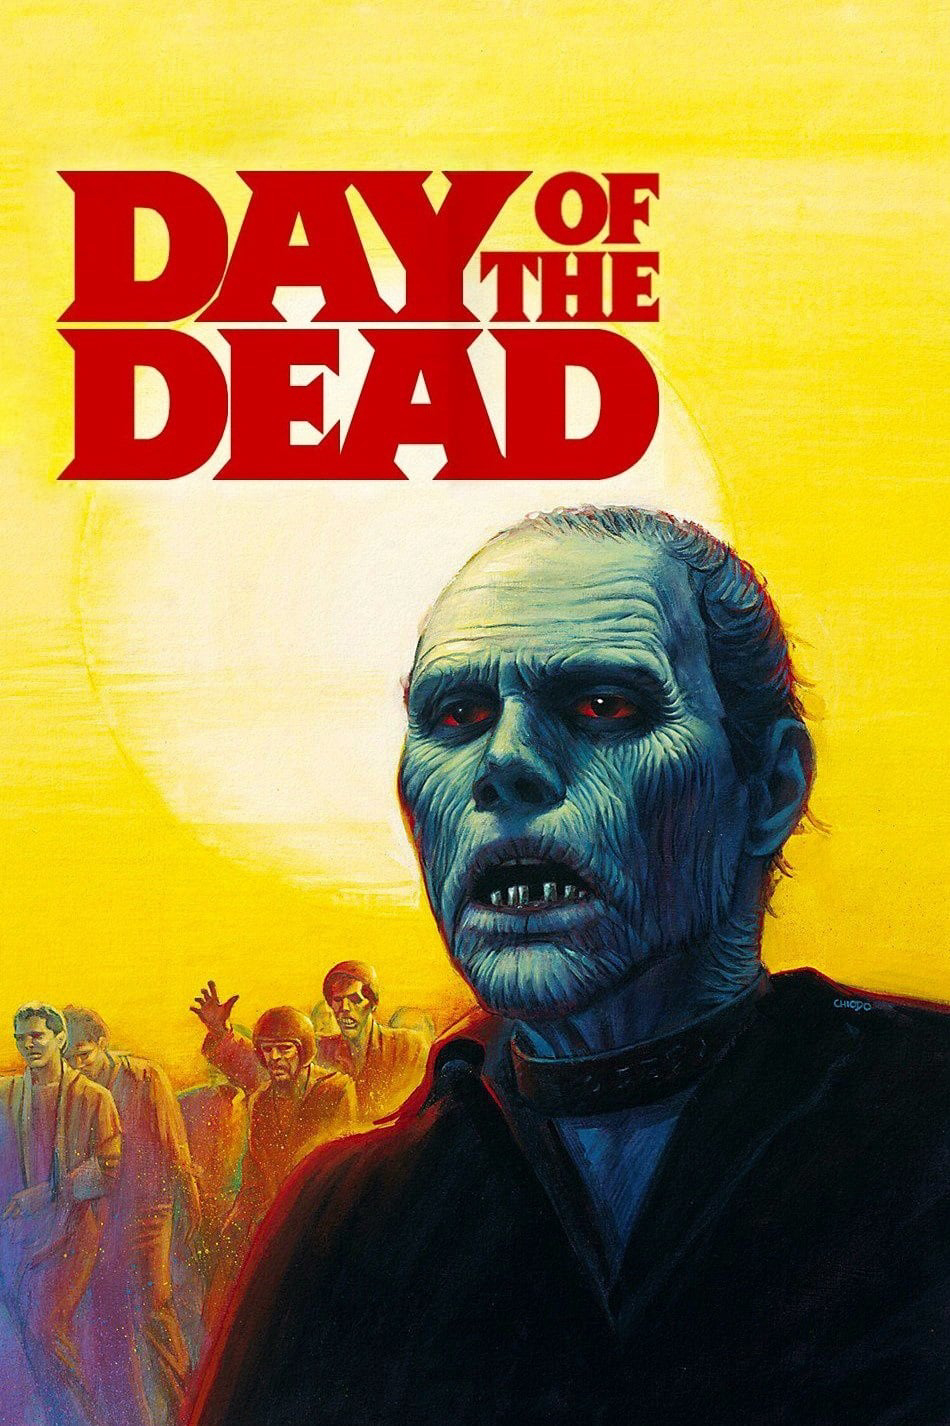 Poster Phim Ngày Của Người Chết (Day of the Dead)